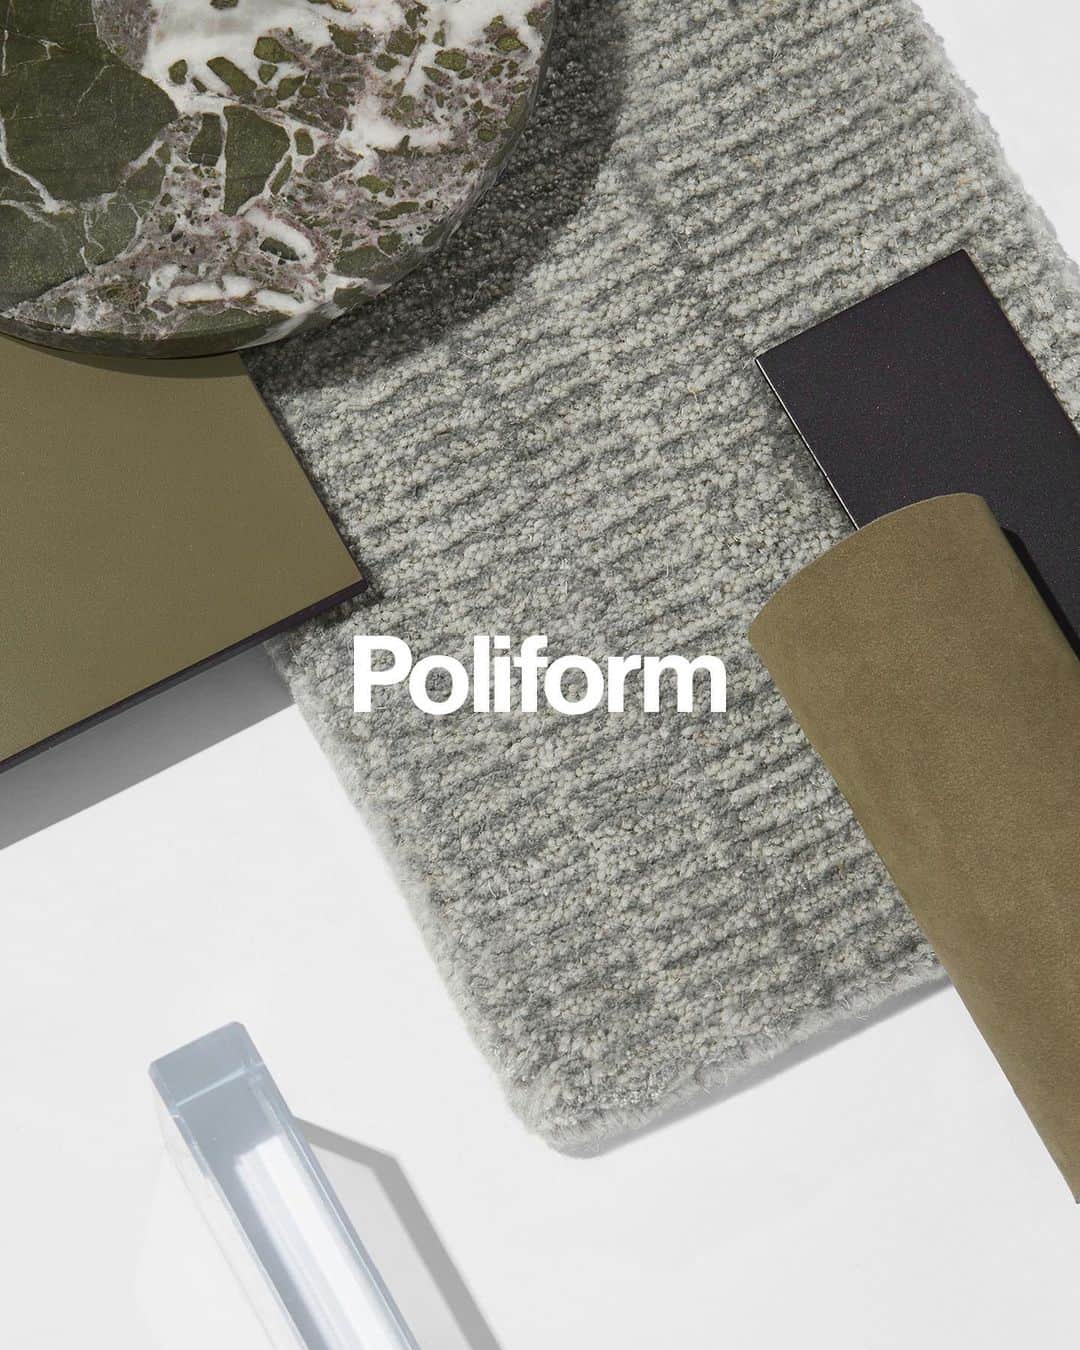 Poliform|Varennaのインスタグラム：「Design always goes hand in hand with research into trends and a meticulous selection of materials and finishes, in accordance with an idea of style that expresses its character and uniqueness in the harmony of the tones, the elegance of the combinations and the quality of the tactile experience. Poliform has always made research of trends one of its strengths and attempts to transfer this know-how also inside its stores worldwide to ensure the best in-store experience. Get inspired by our materials and discover the Poliform collection on poliform.com.   #poliform #design #madeinitaly #designinspiration #poliforminspiration #materials #poliformfinishes #interiordesign #designtrends #furniturematerials #poliformstyle #home #homedesign」